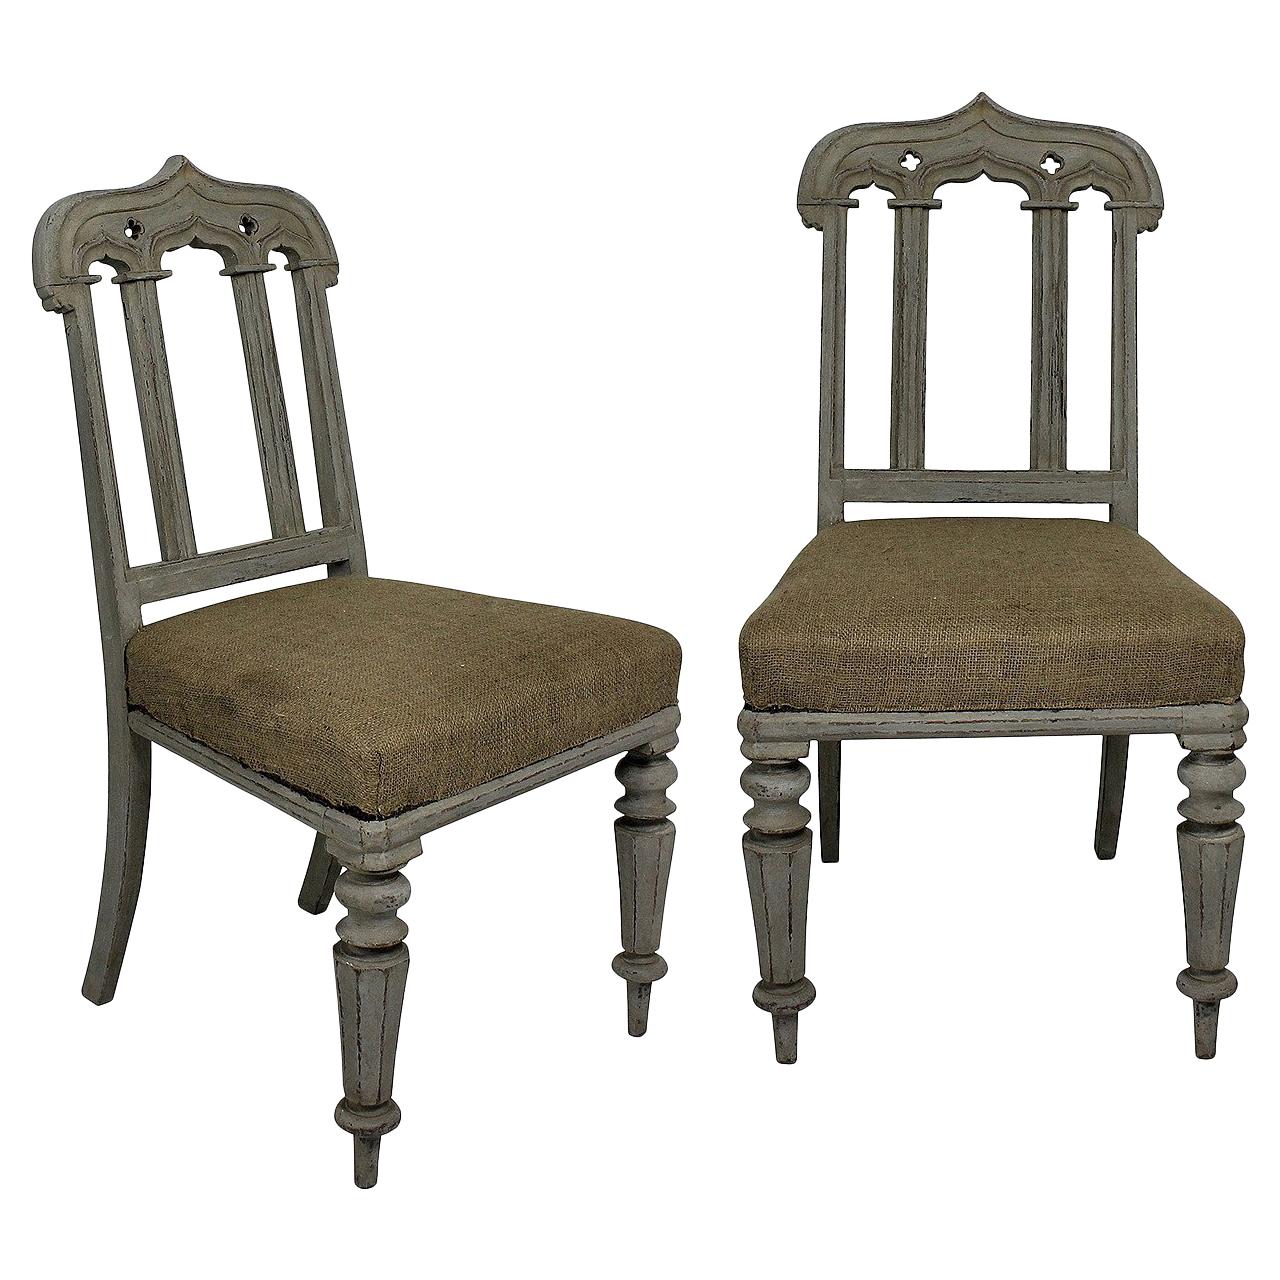 Pair of English William IV Painted Gothic Chairs